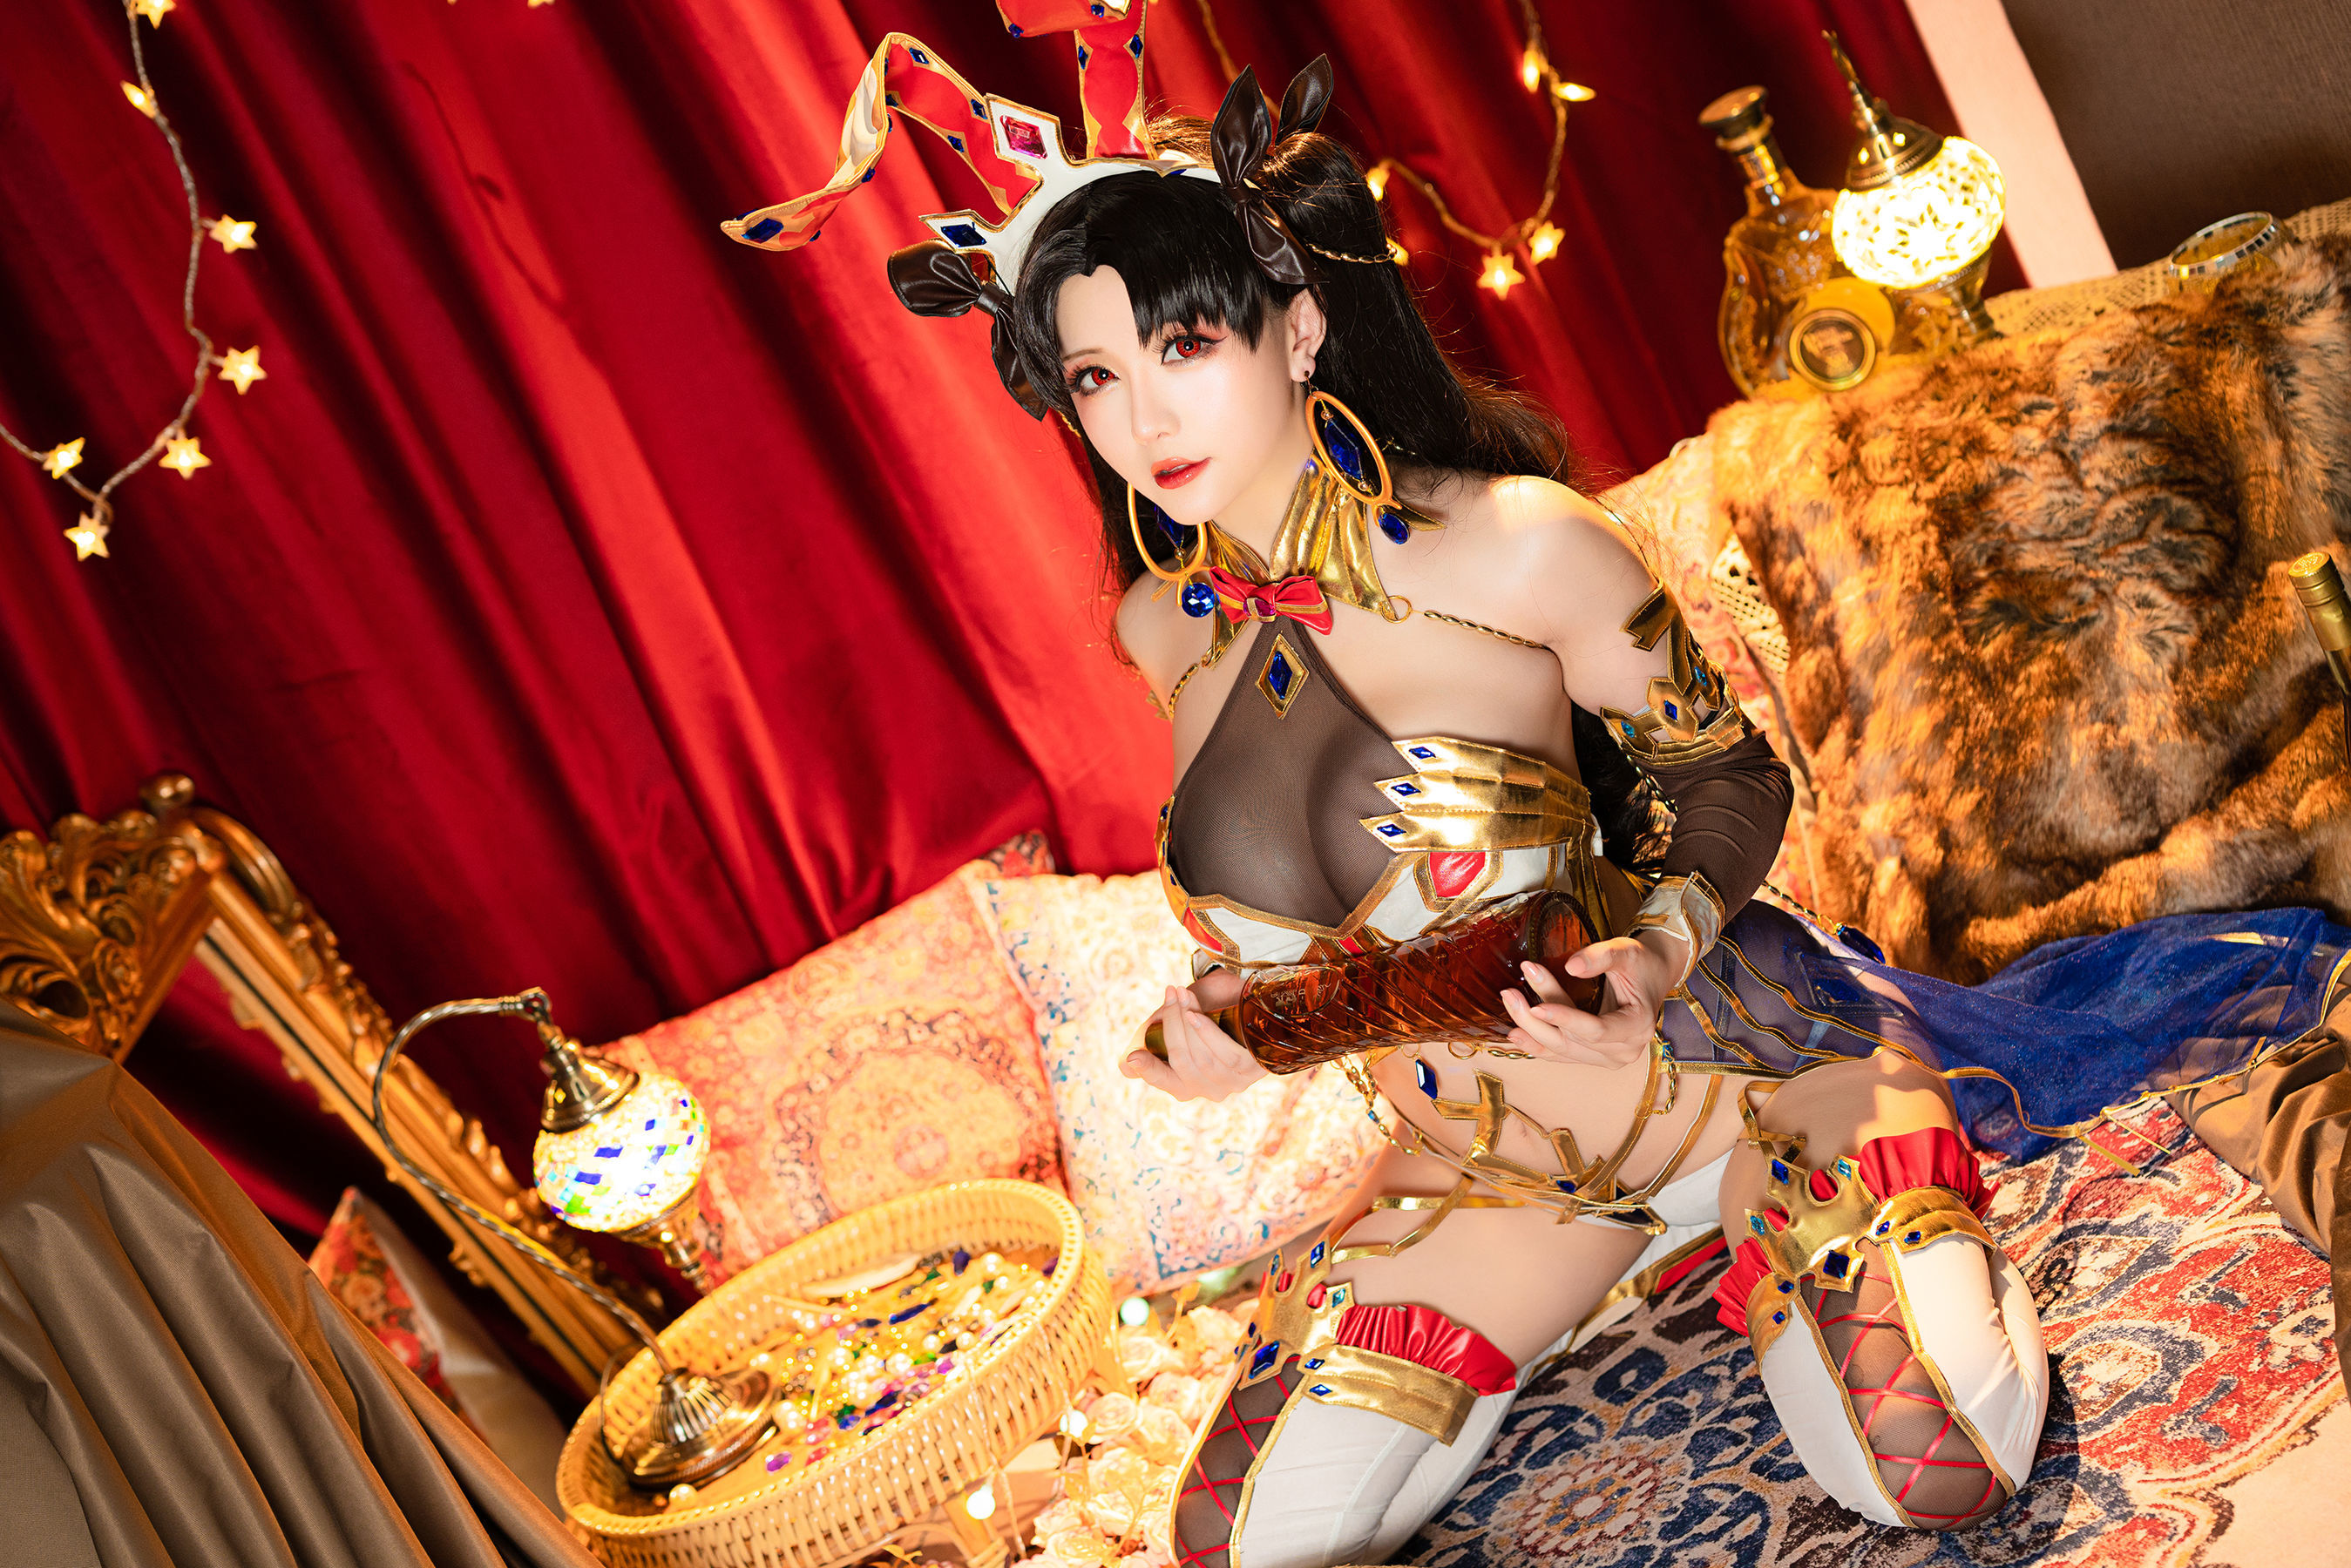 [Net Red COSER Photo] Miss Coser Star Chichi - Ishtar Colleague Istarin Page 59 No.25106f